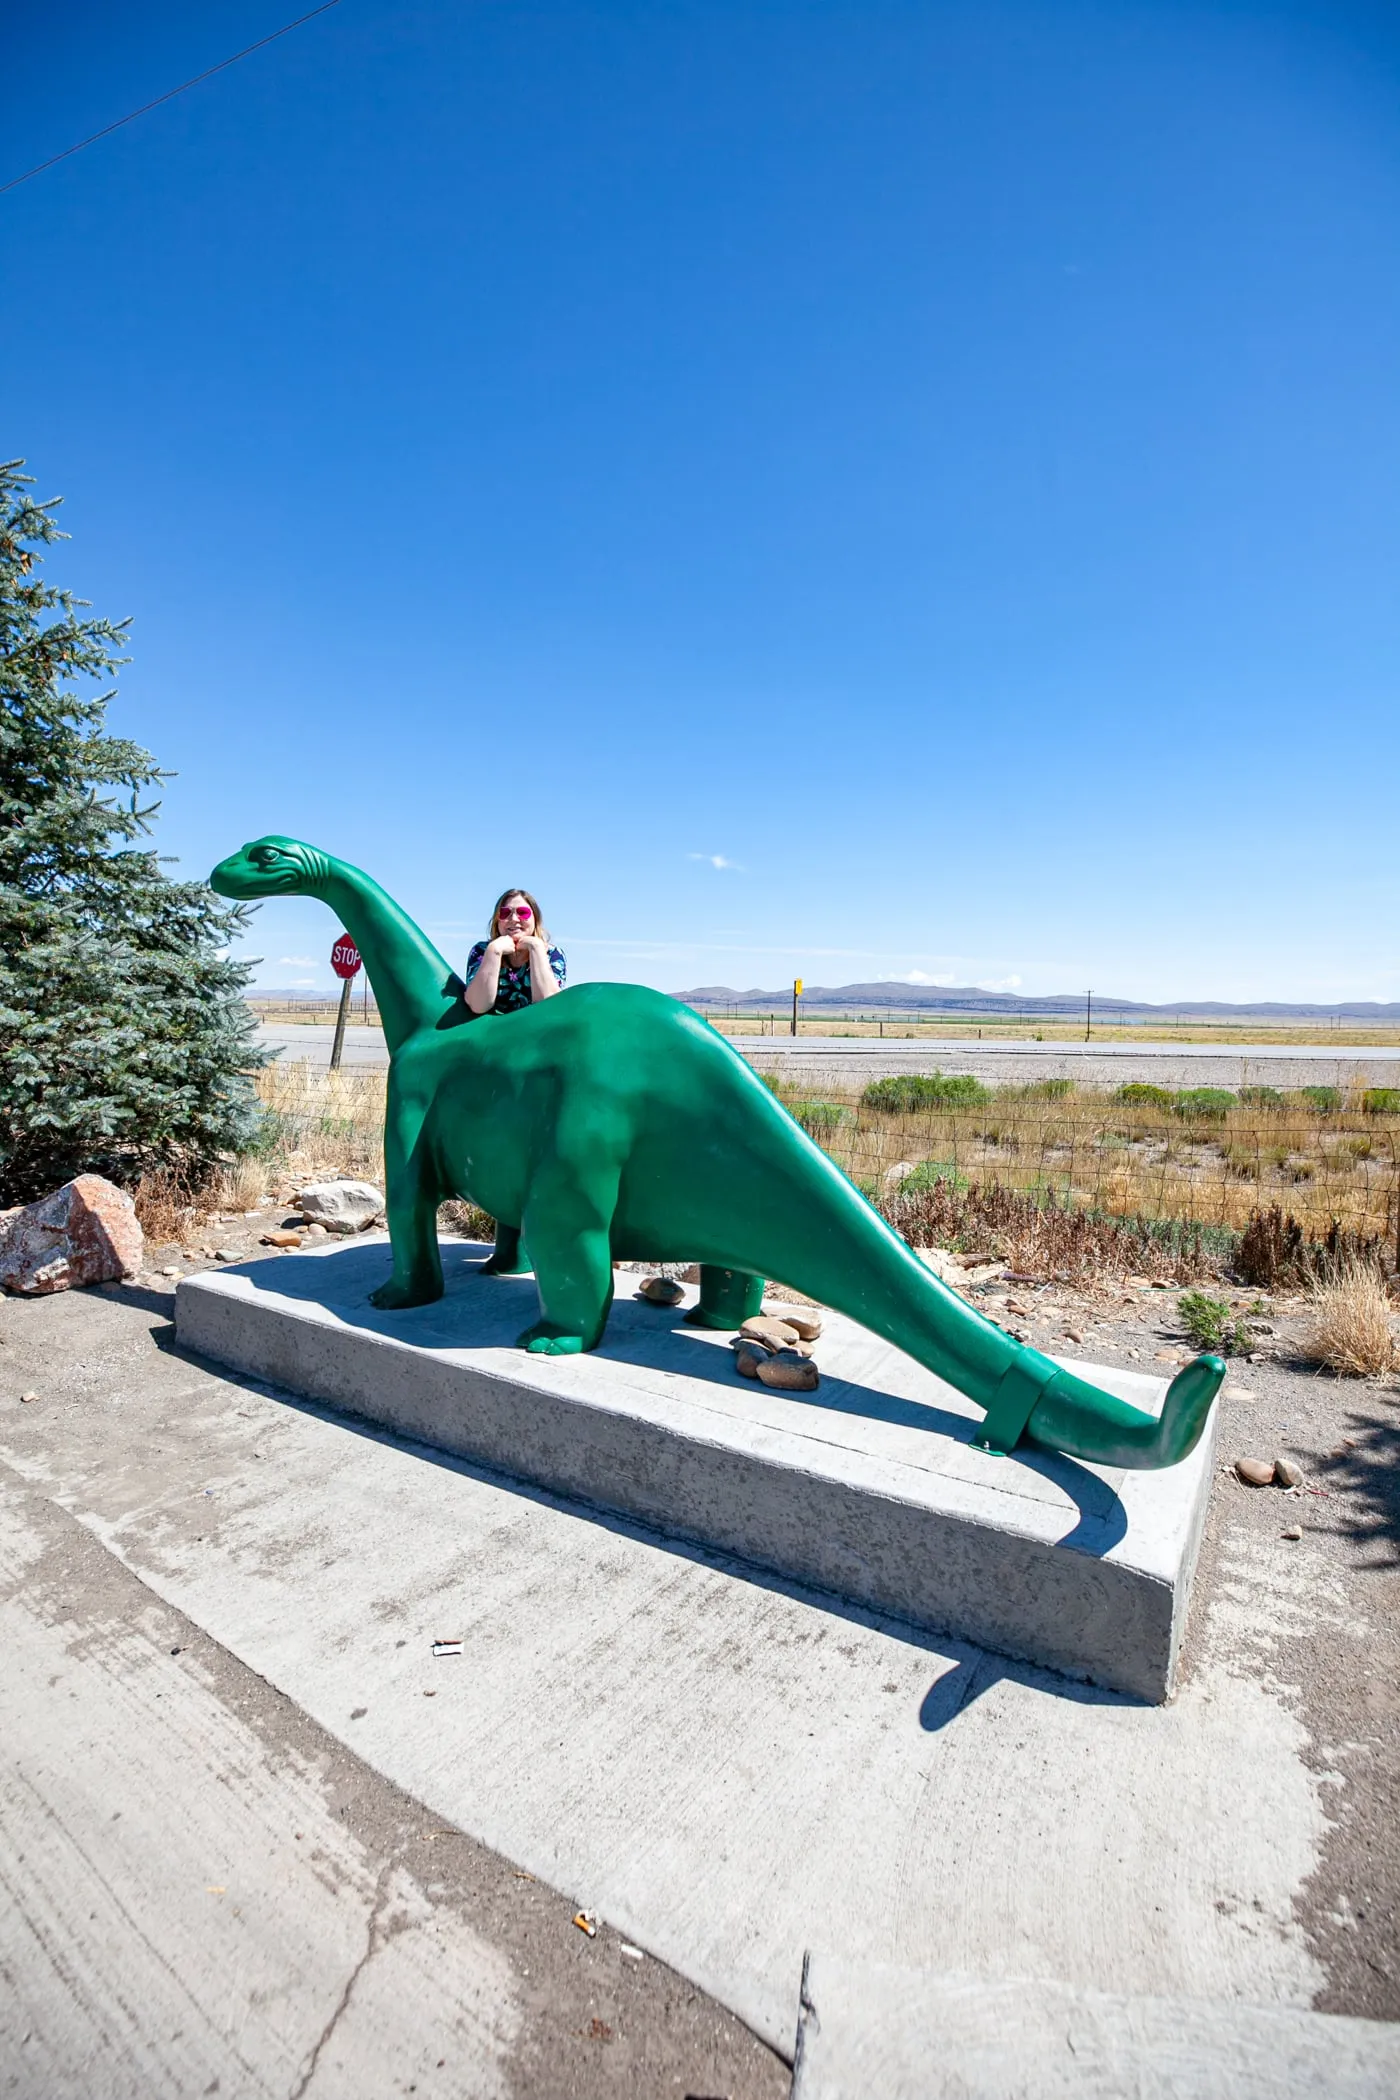 Sinclair Gas Station Dinosaur in Sinclair, Wyoming home of the Sinclair Refinery | Wyoming Roadside Attractions